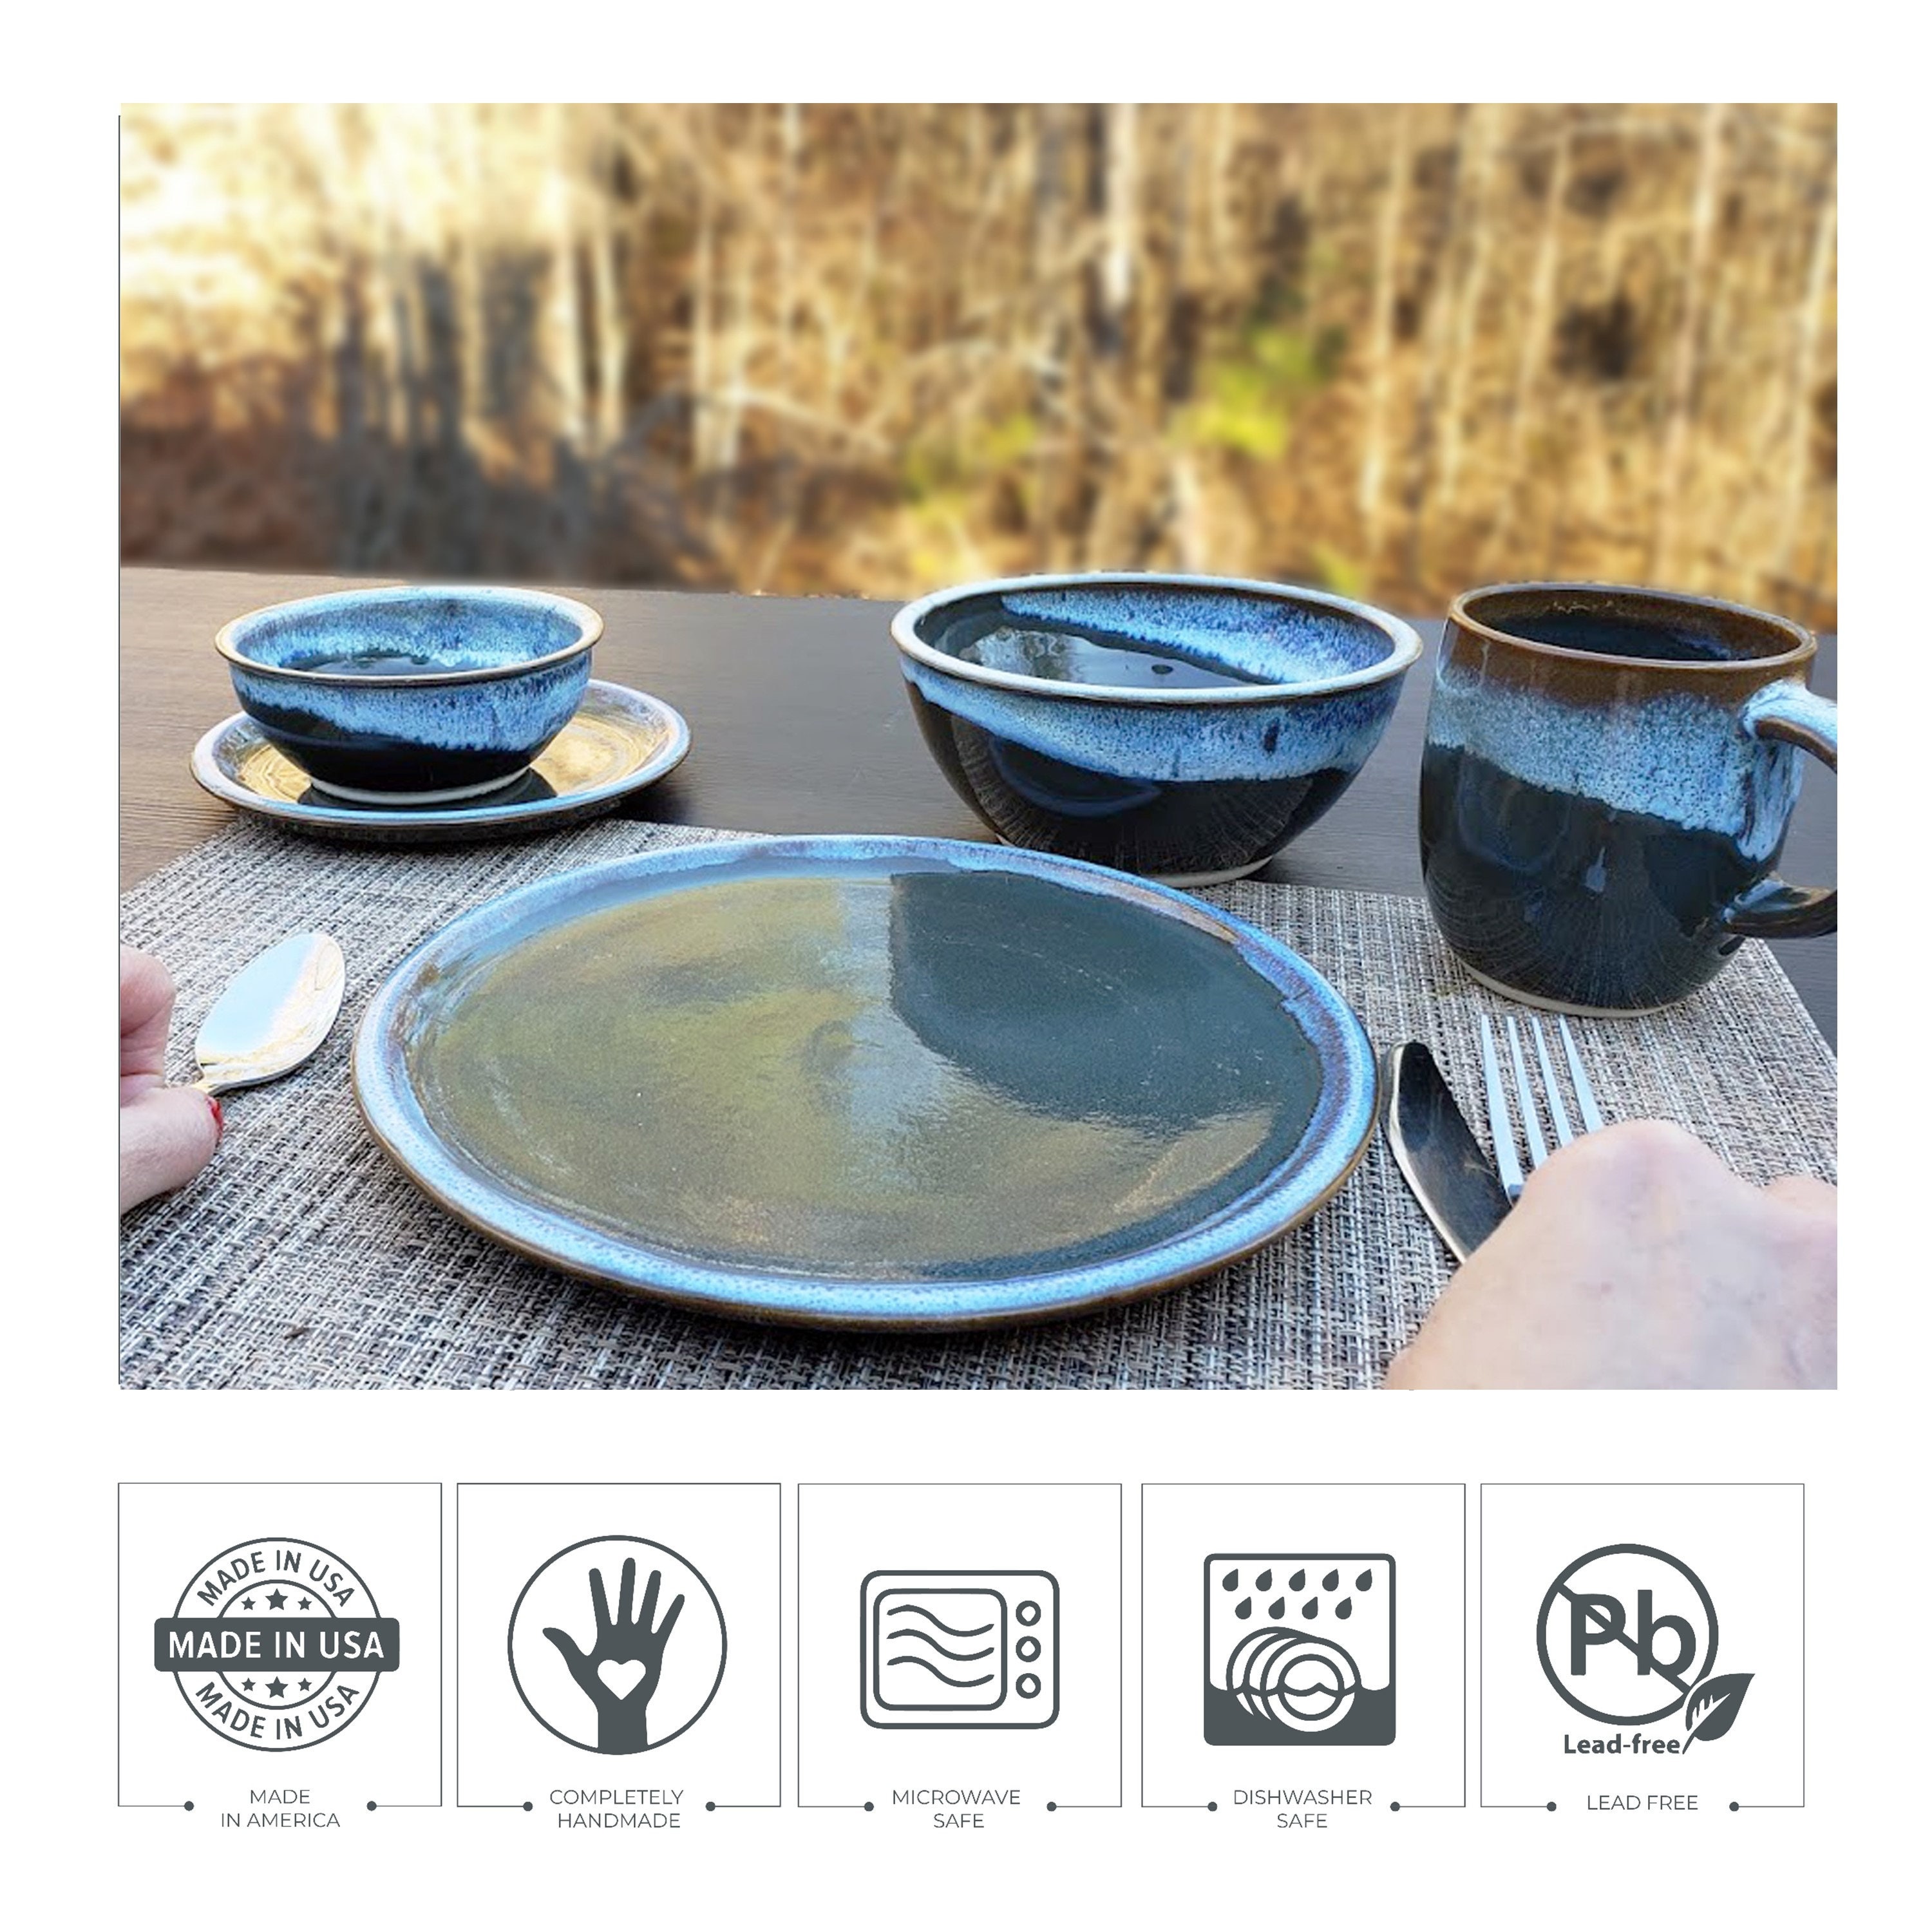 Dishwasher Quick and Secure Gadget Plate and Bowl Set Rustic